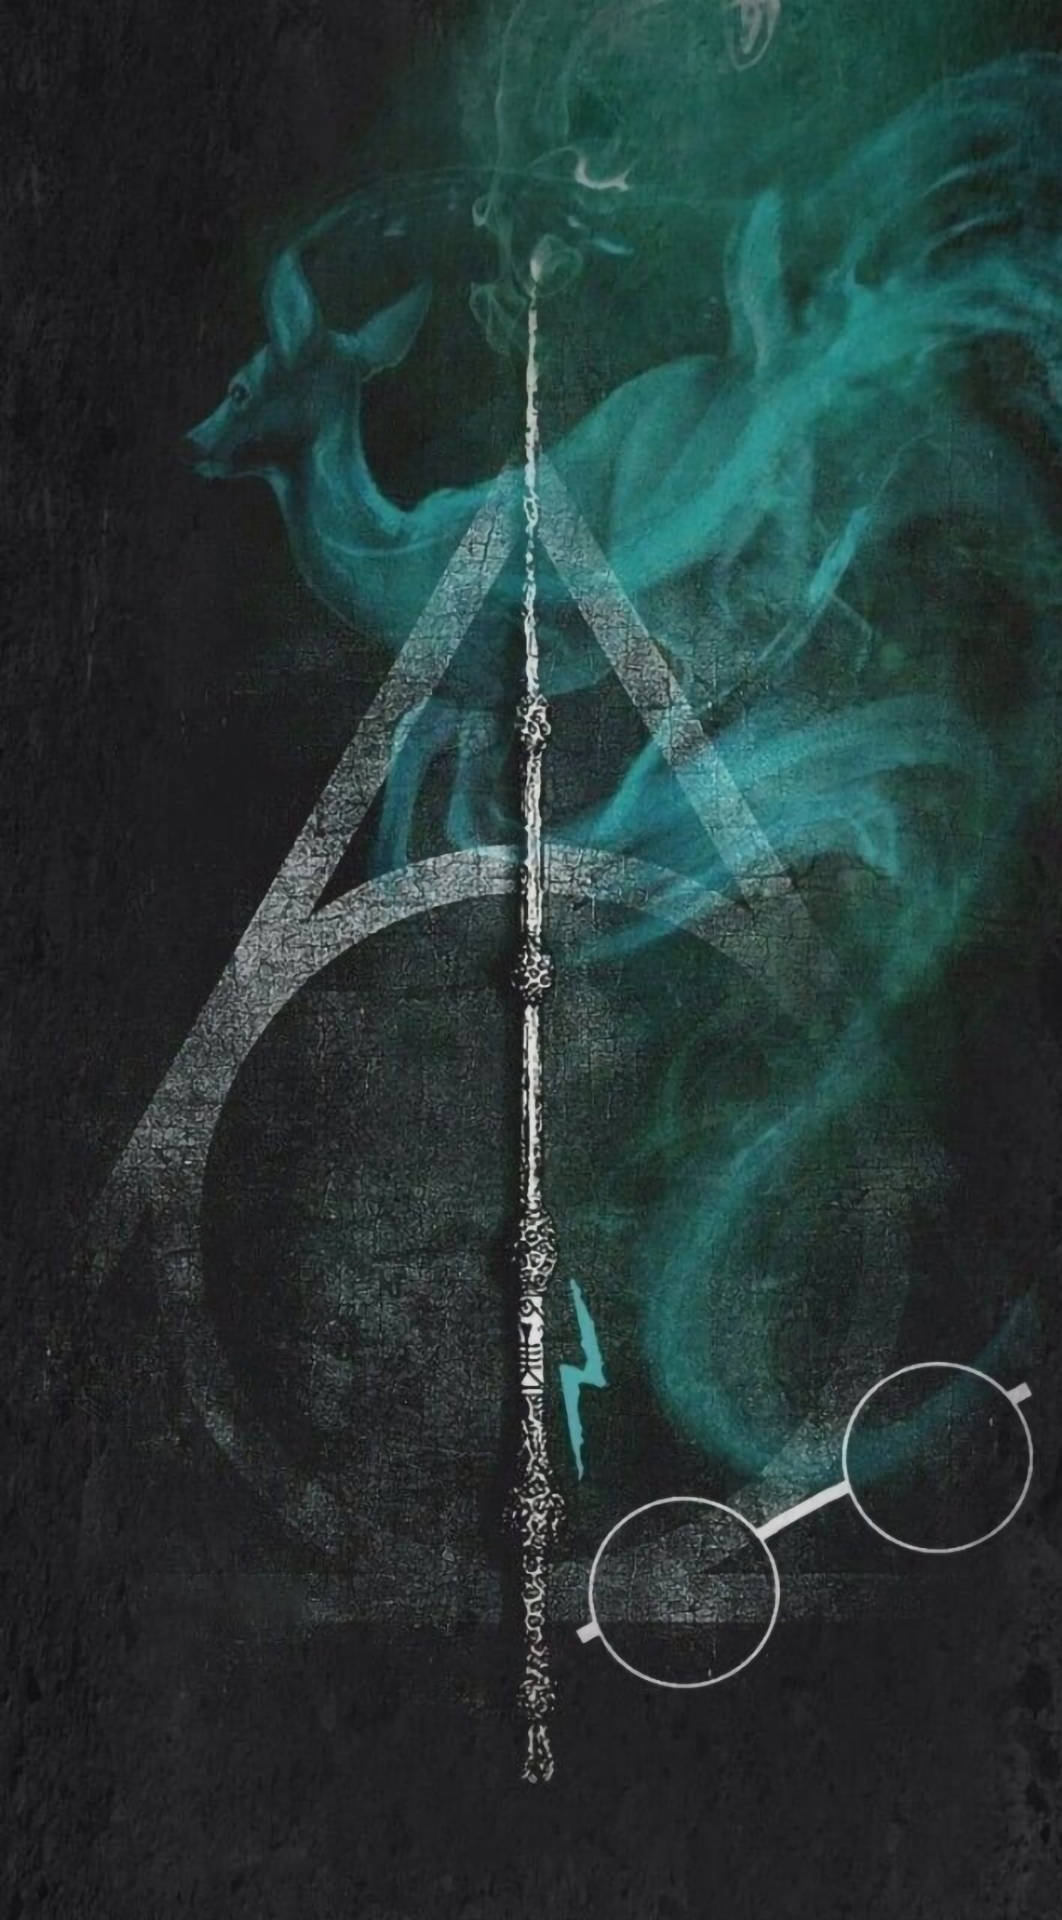 harry potter and the deathly hallows symbol